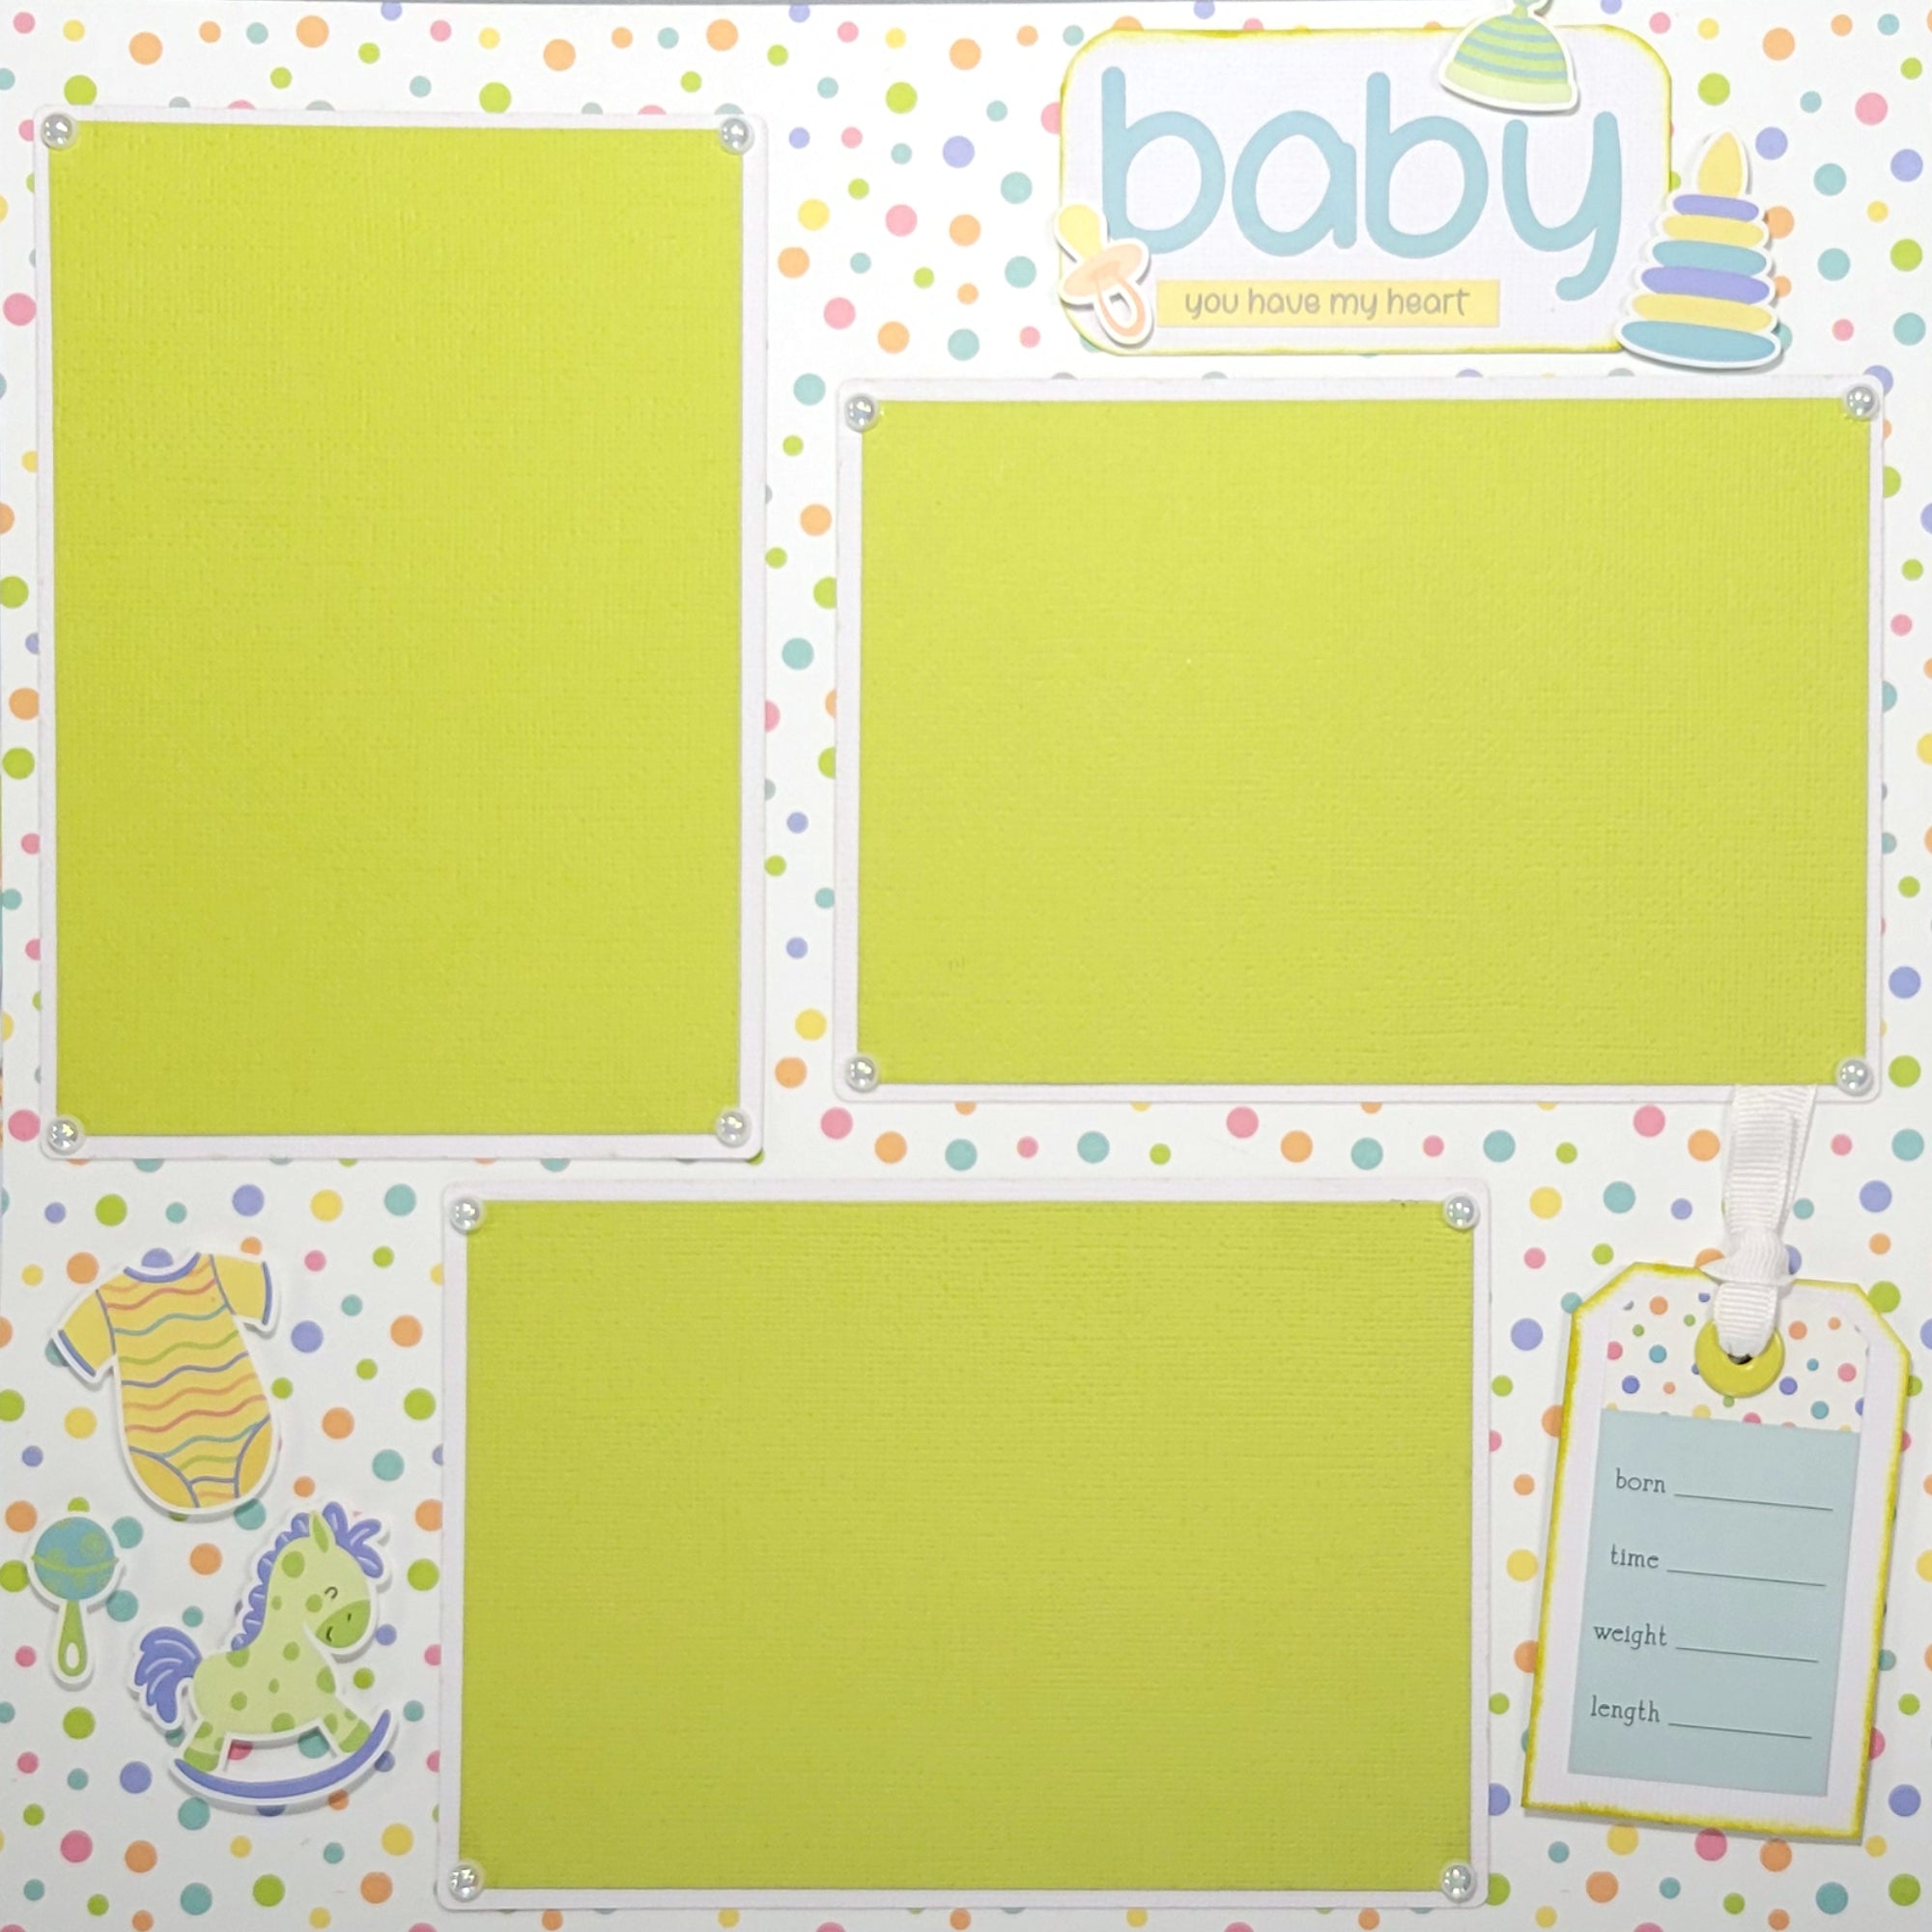 Welcome Home Sweet Baby Boy (2) - 12 x 12 Pages, Fully-Assembled & Hand-Crafted 3D Scrapbook Premade by SSC Designs